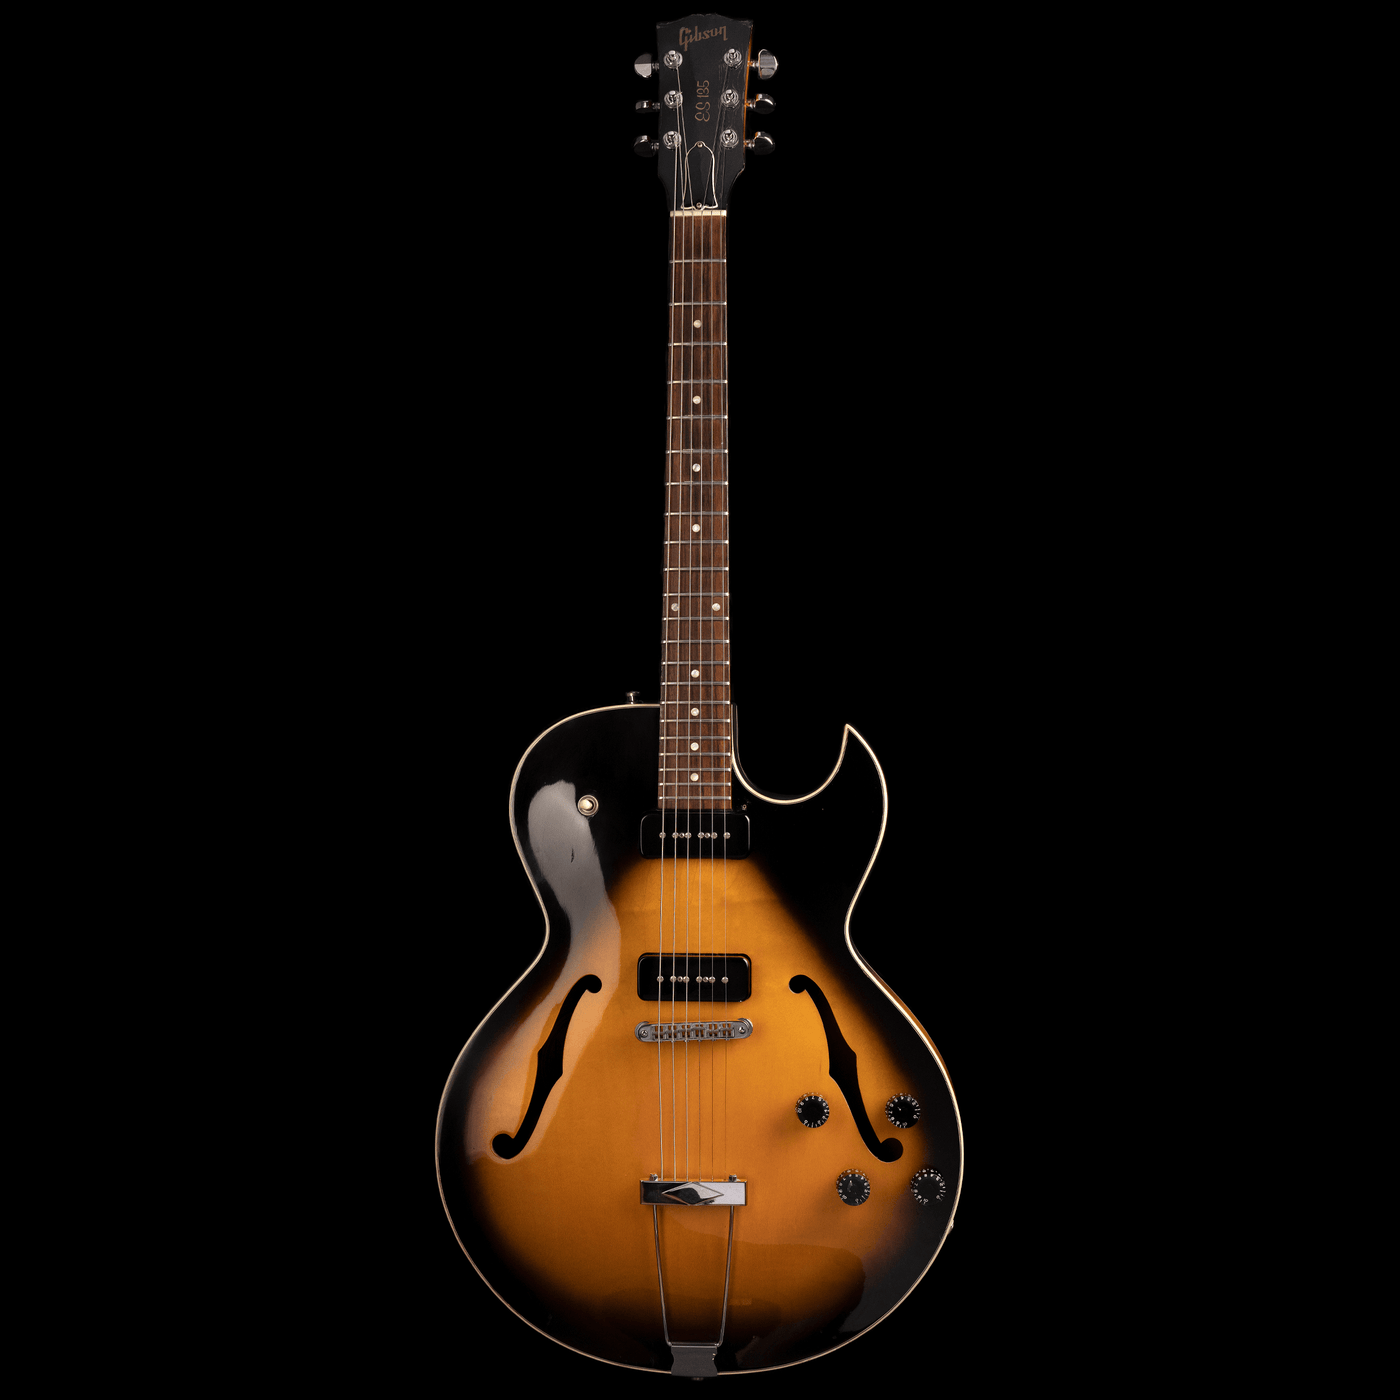 Gibson ES-135 Tobacco Sunburst 1992 - $3599990 - Gearhub - An early version of a familiar favorite, this ES-135 features a super comfortable neck profile, full-sounding P100 pickups, and a dazzling sunburst finish that has aged beautifully. It has been player upgraded with a set of Grover tuners, and plays like an absolute dream up and down the length of the neck. Professionally inspected and setup by the experts at Cream City Music, it will arrive ready to play out of the case! Cuerpo • Modelo: ES-135• Mad